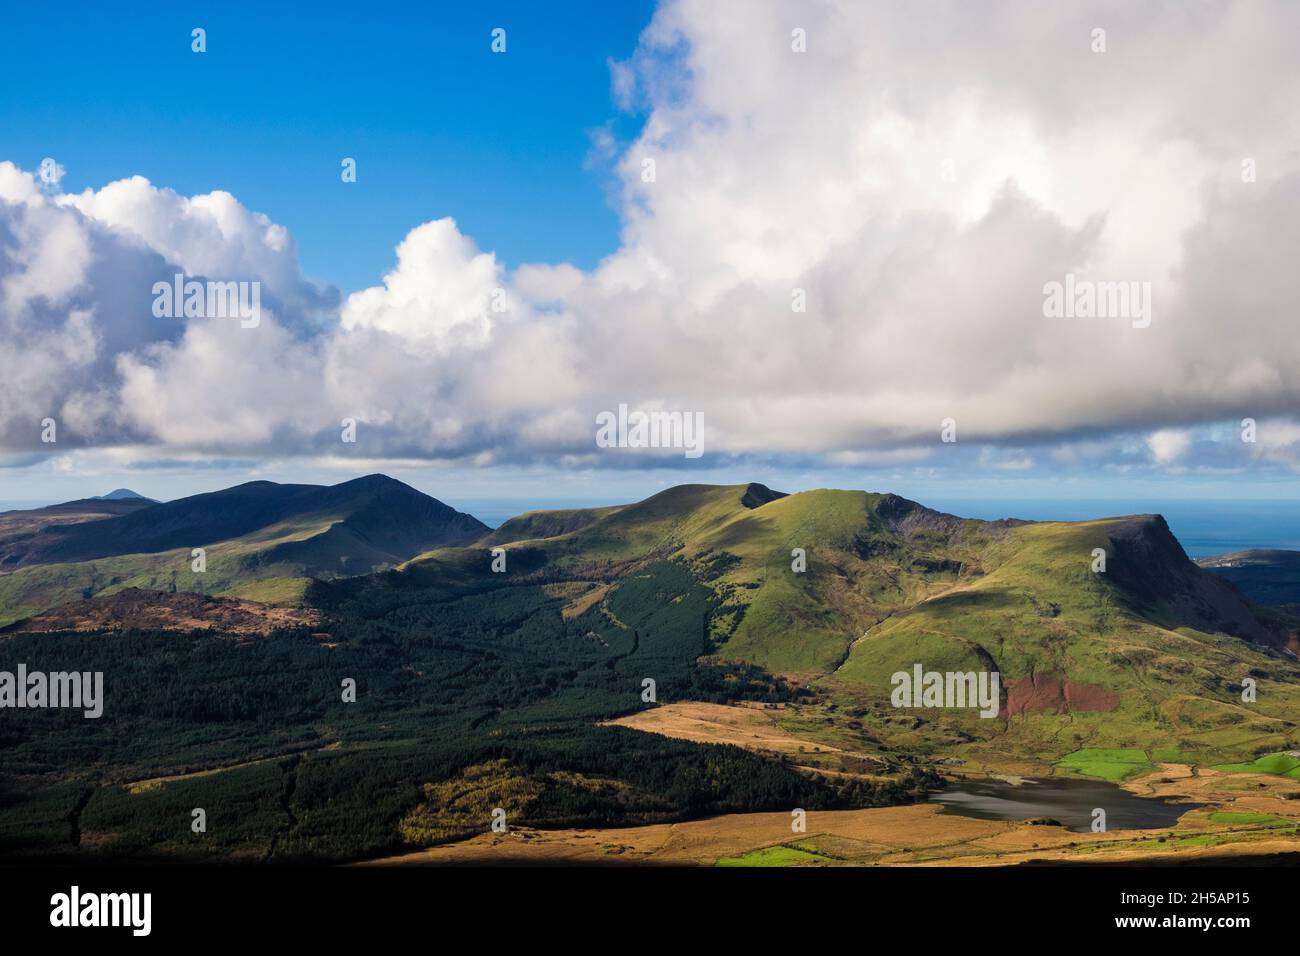 View across valley from slopes of Yr Aran to Nantlle Ridge above Beddgelert Forest in Snowdonia National Park. Rhyd Ddu, Gwynedd, north Wales, UK Stock Photo